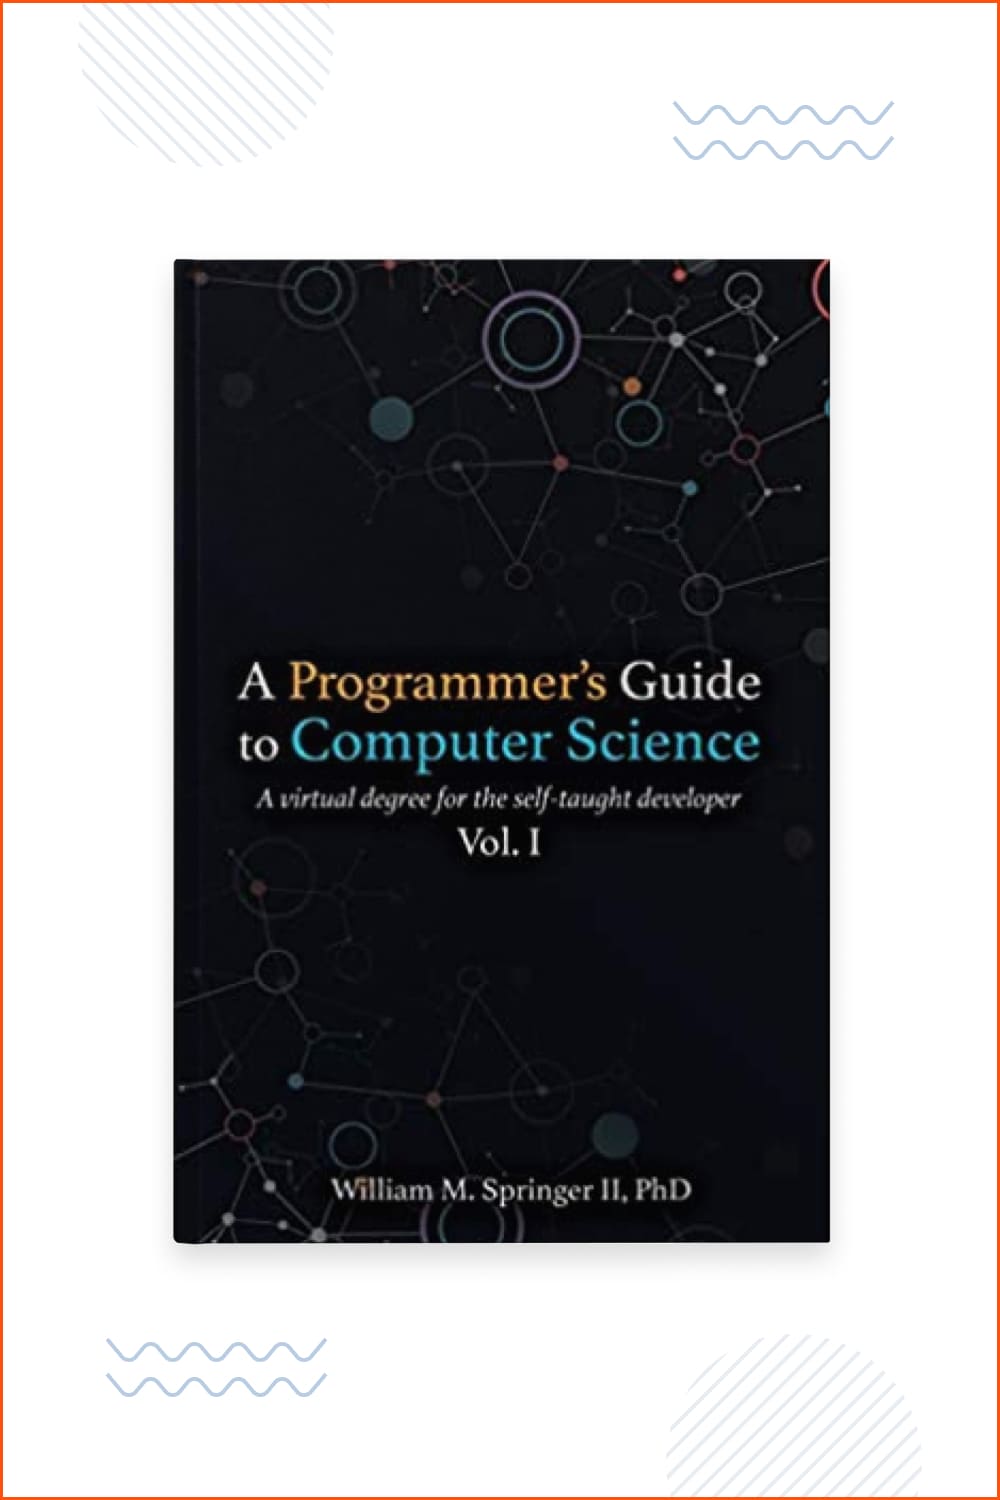 Book 'A Programmer's Guide to Computer Science'.